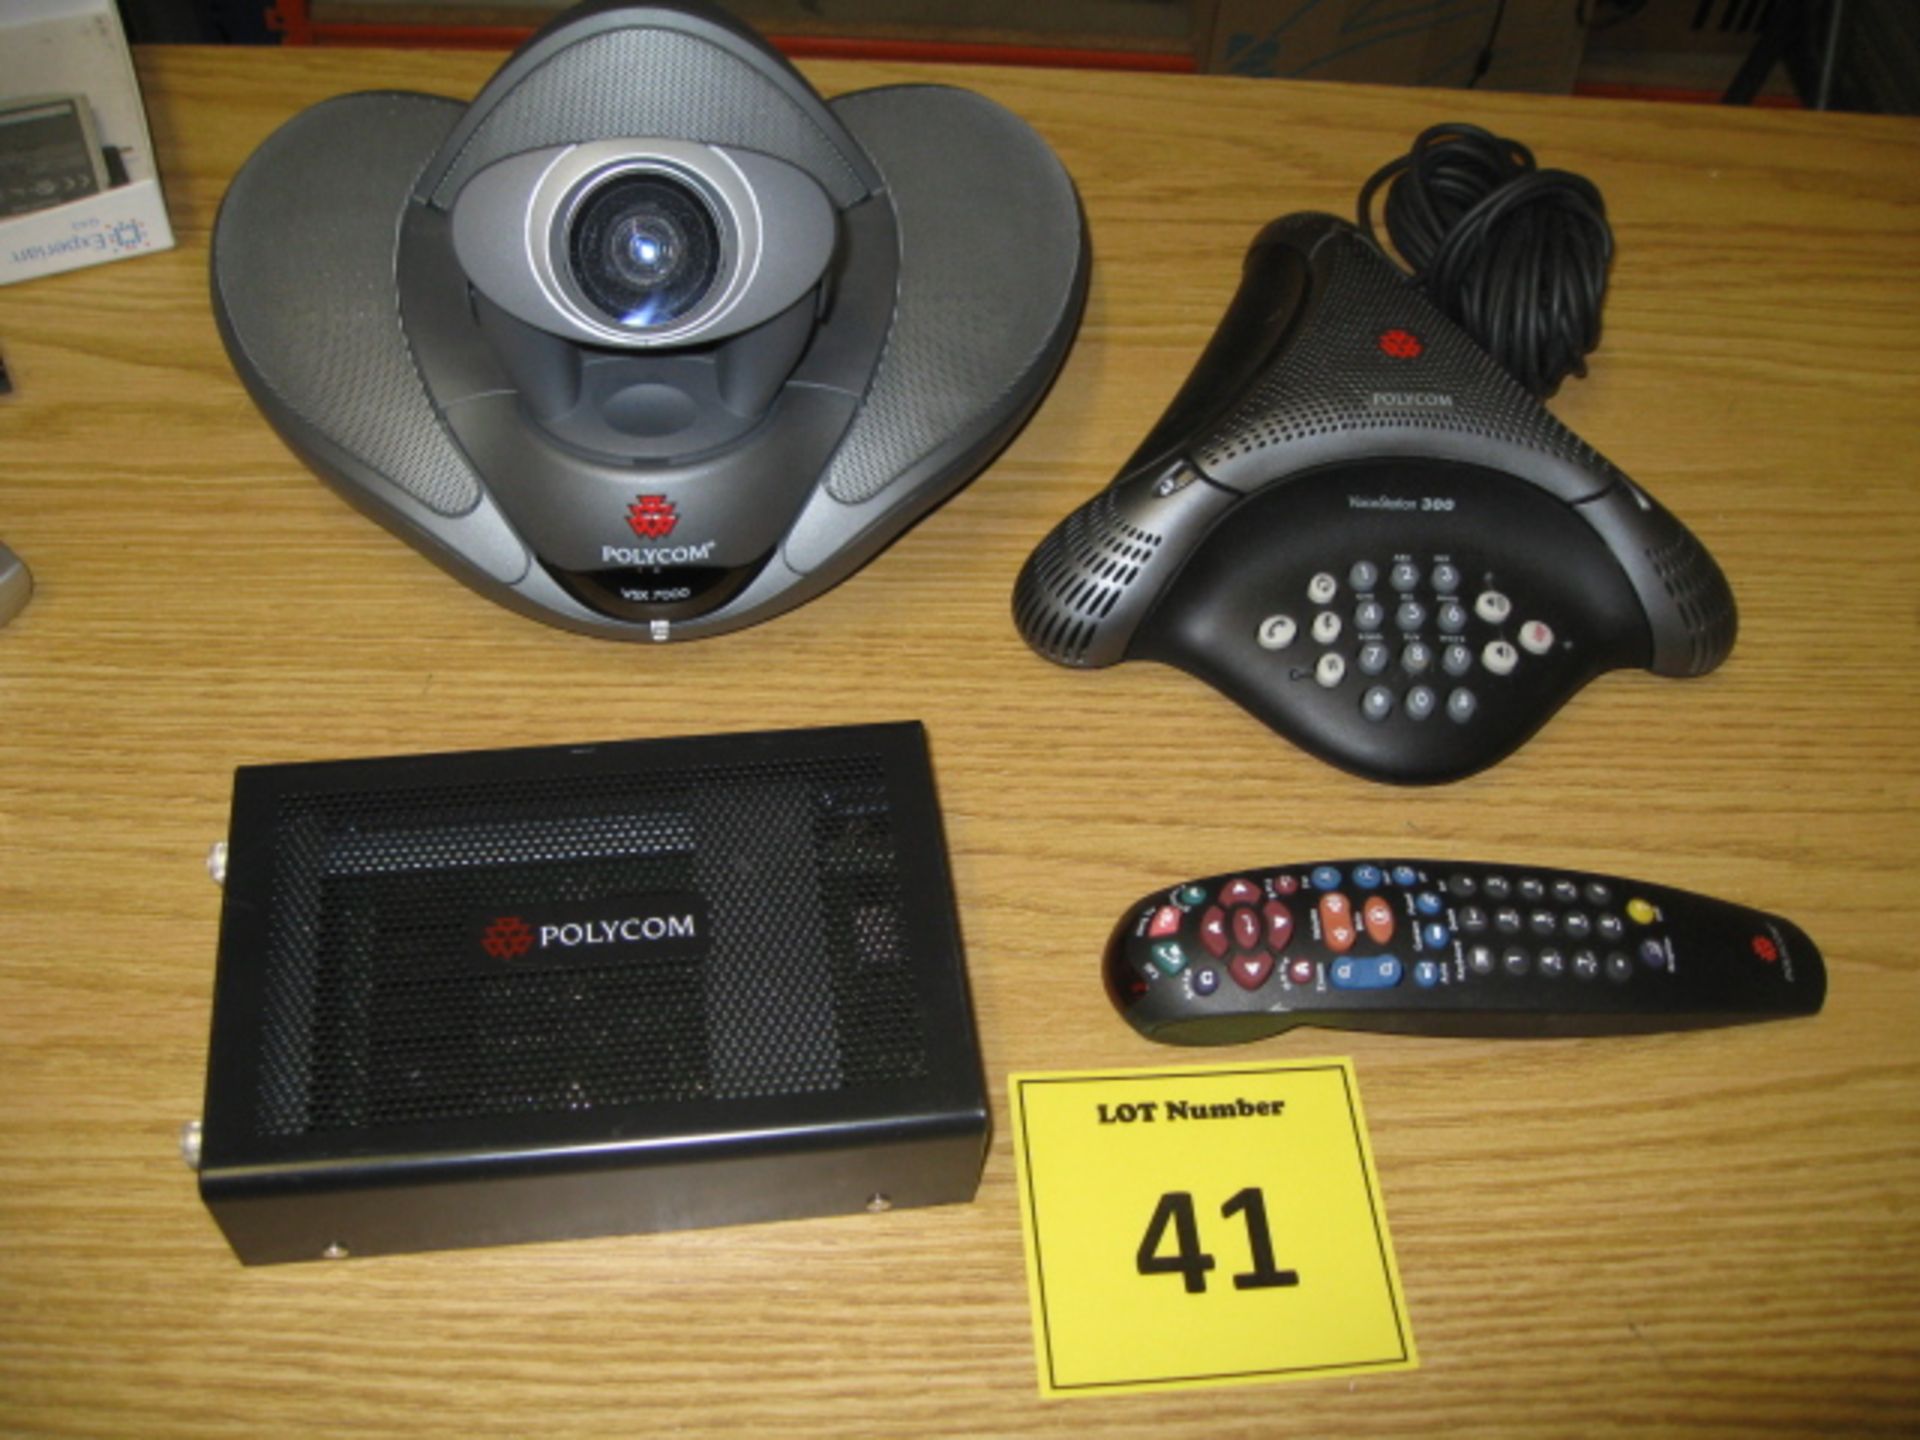 POLYCOM VIDEO CONFERENCING EQUIPMENT. 1 X VSX 7000 WITH CAMERA, 1 X VOICESTATION 300, 1 X HDX